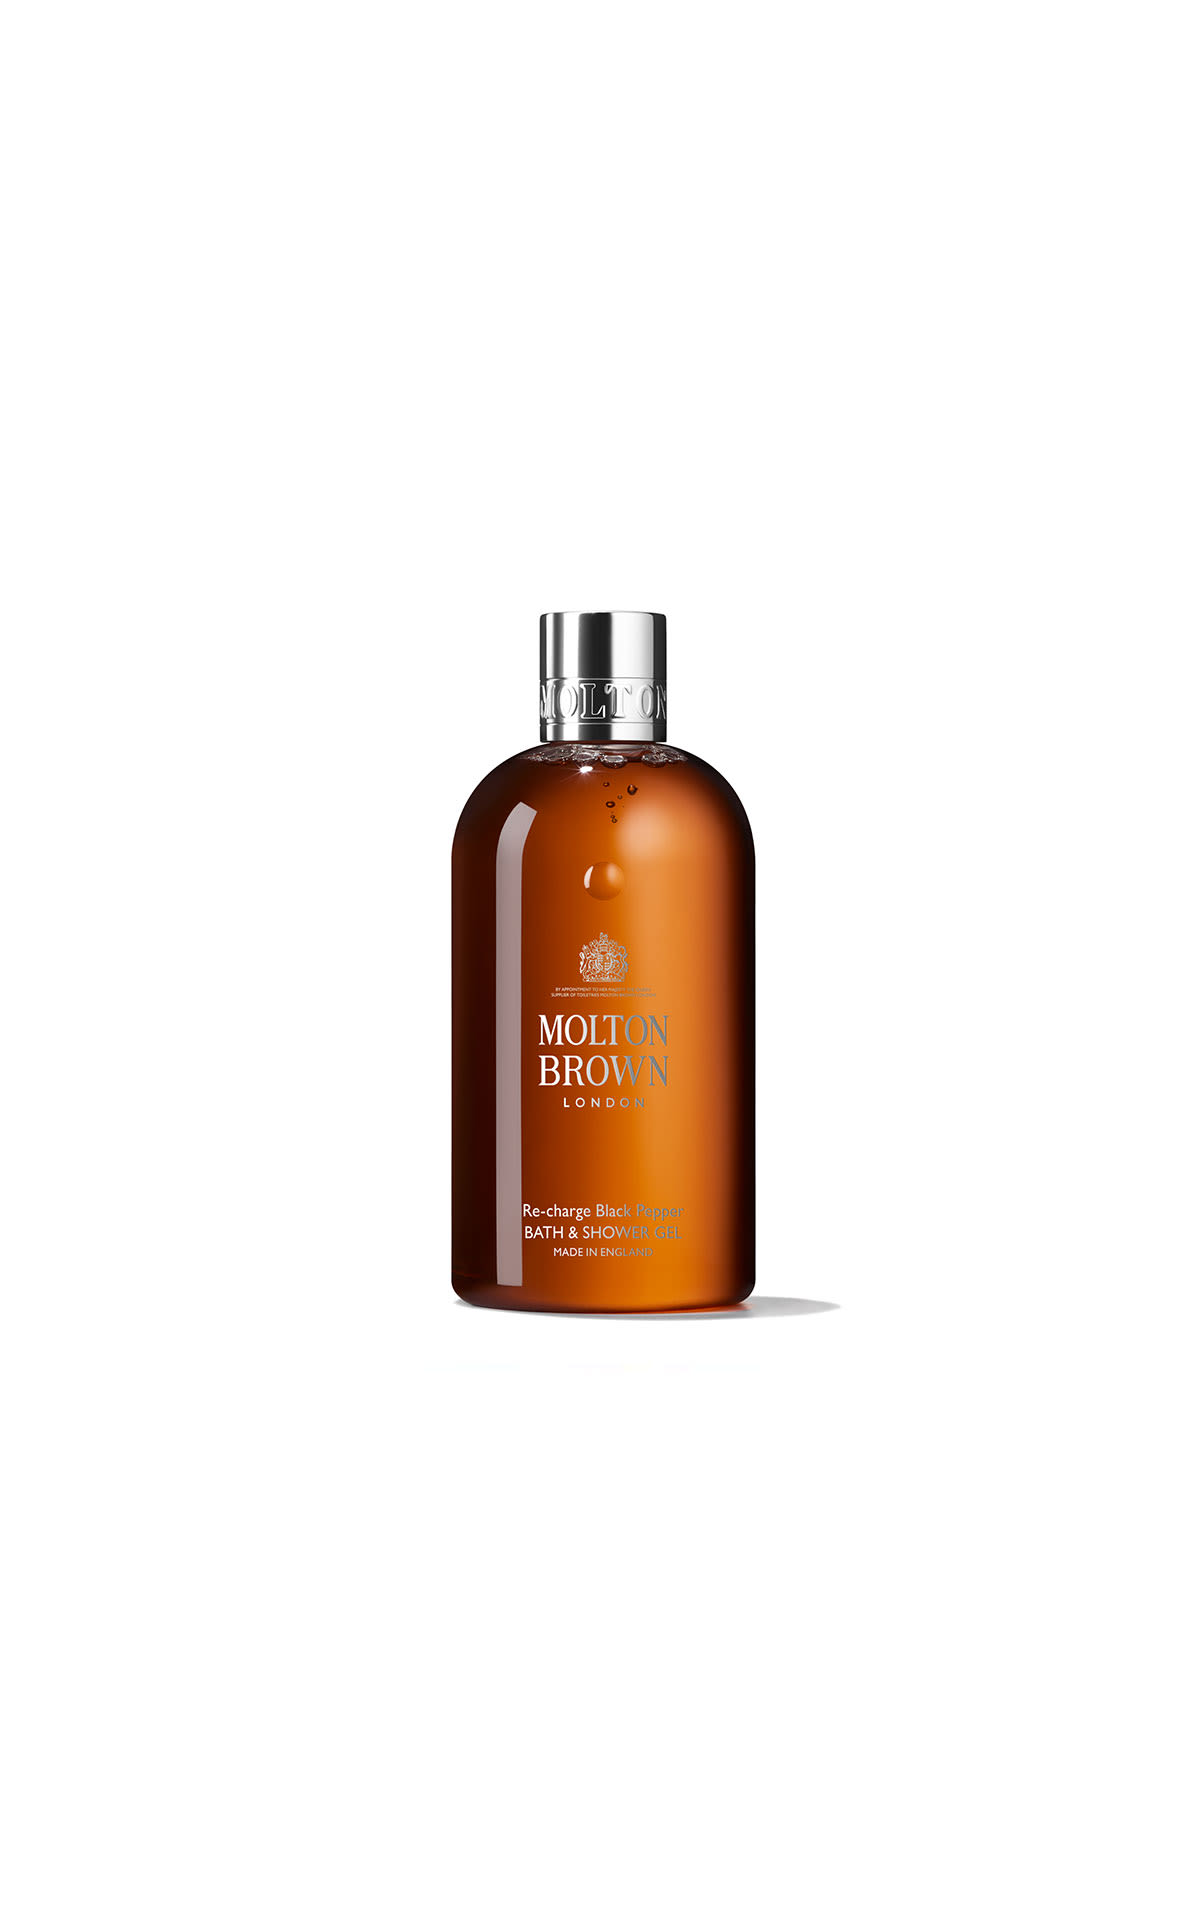 Molton Brown Black pepper body wash from Bicester Village